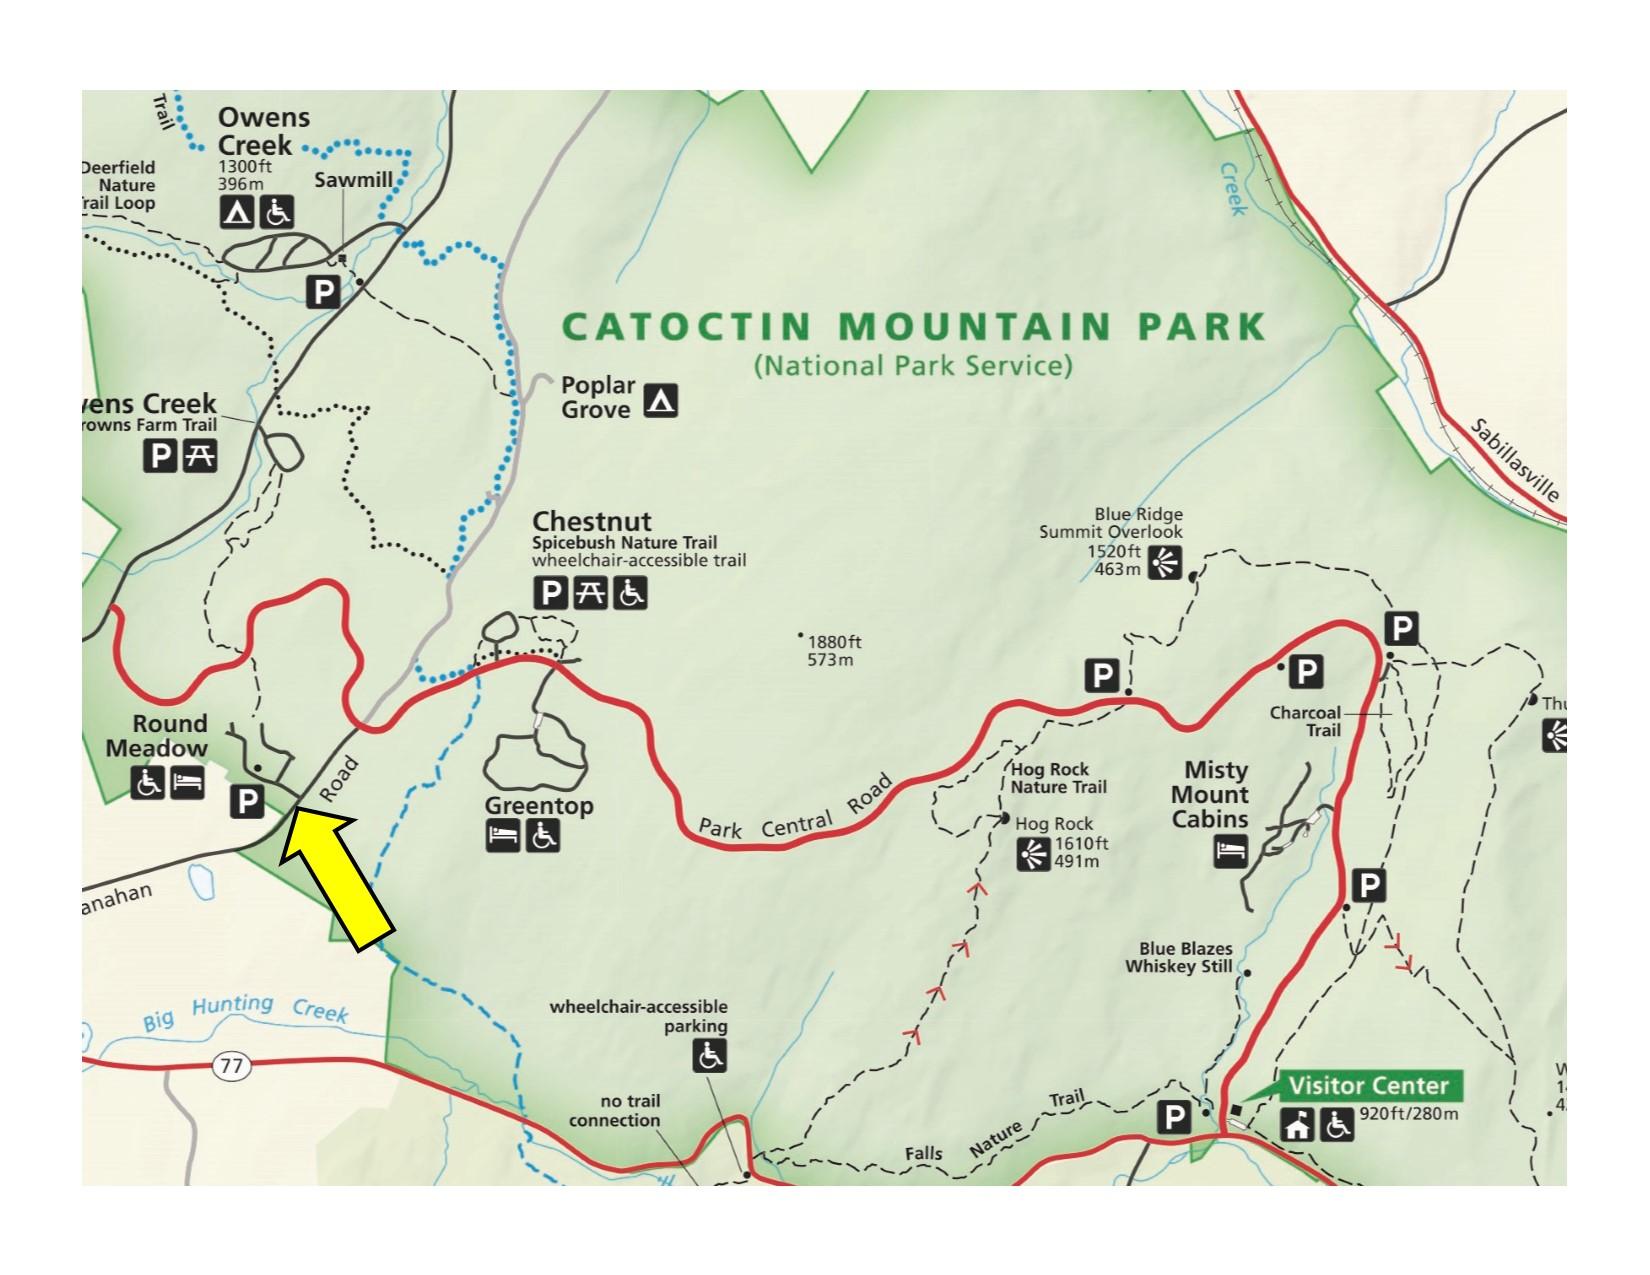 Park map with yellow arrow indicating parking area 